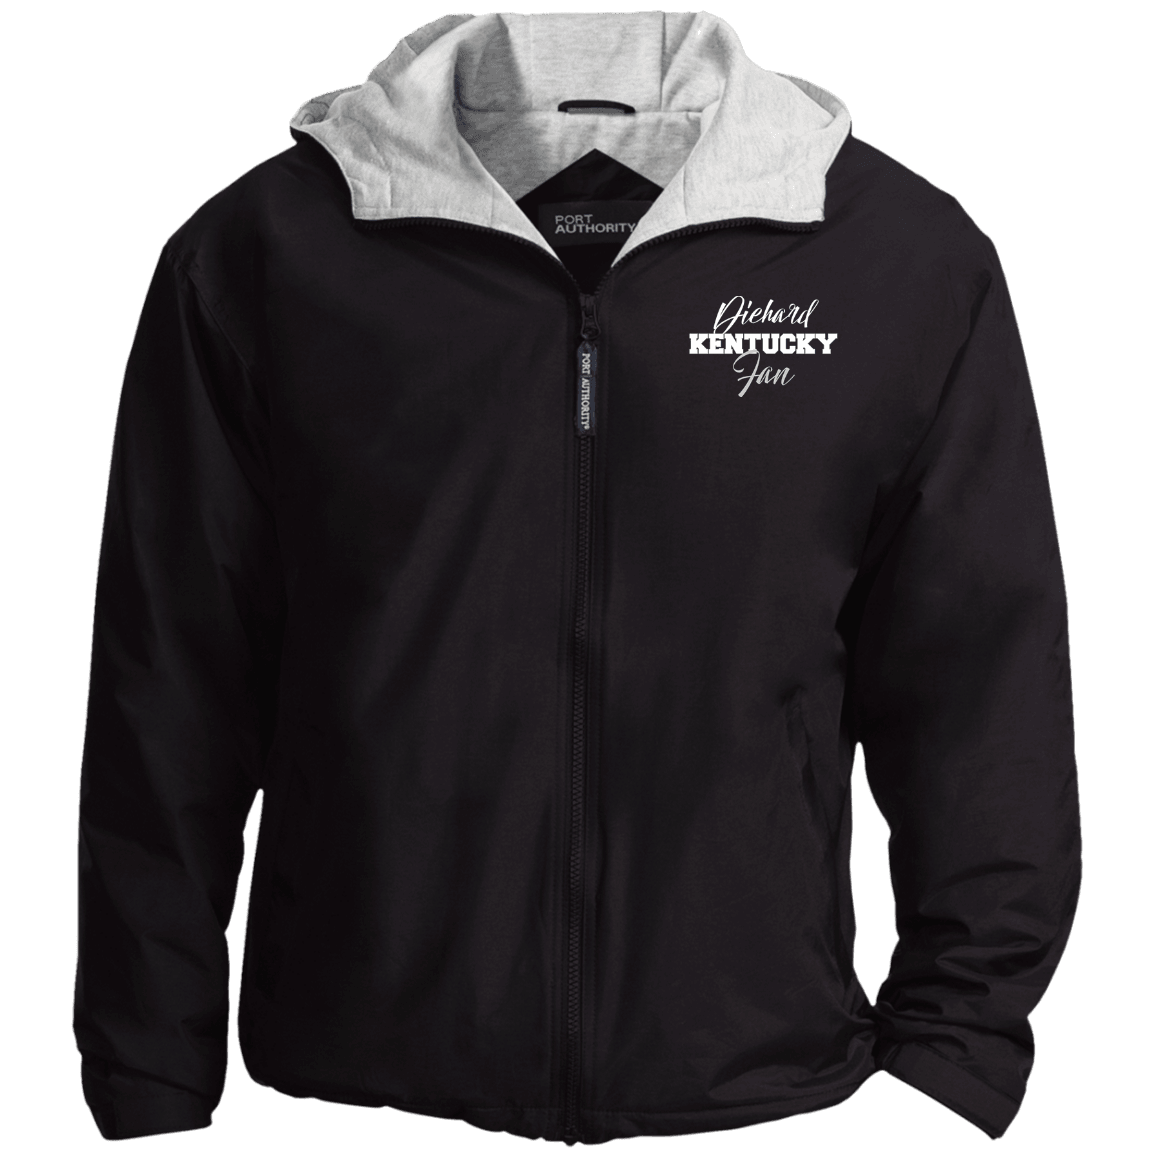 Designs by MyUtopia Shout Out:Diehard Kentucky Fan Embroidered Port Authority Team Jacket,Black/Light Oxford / X-Small,Jackets